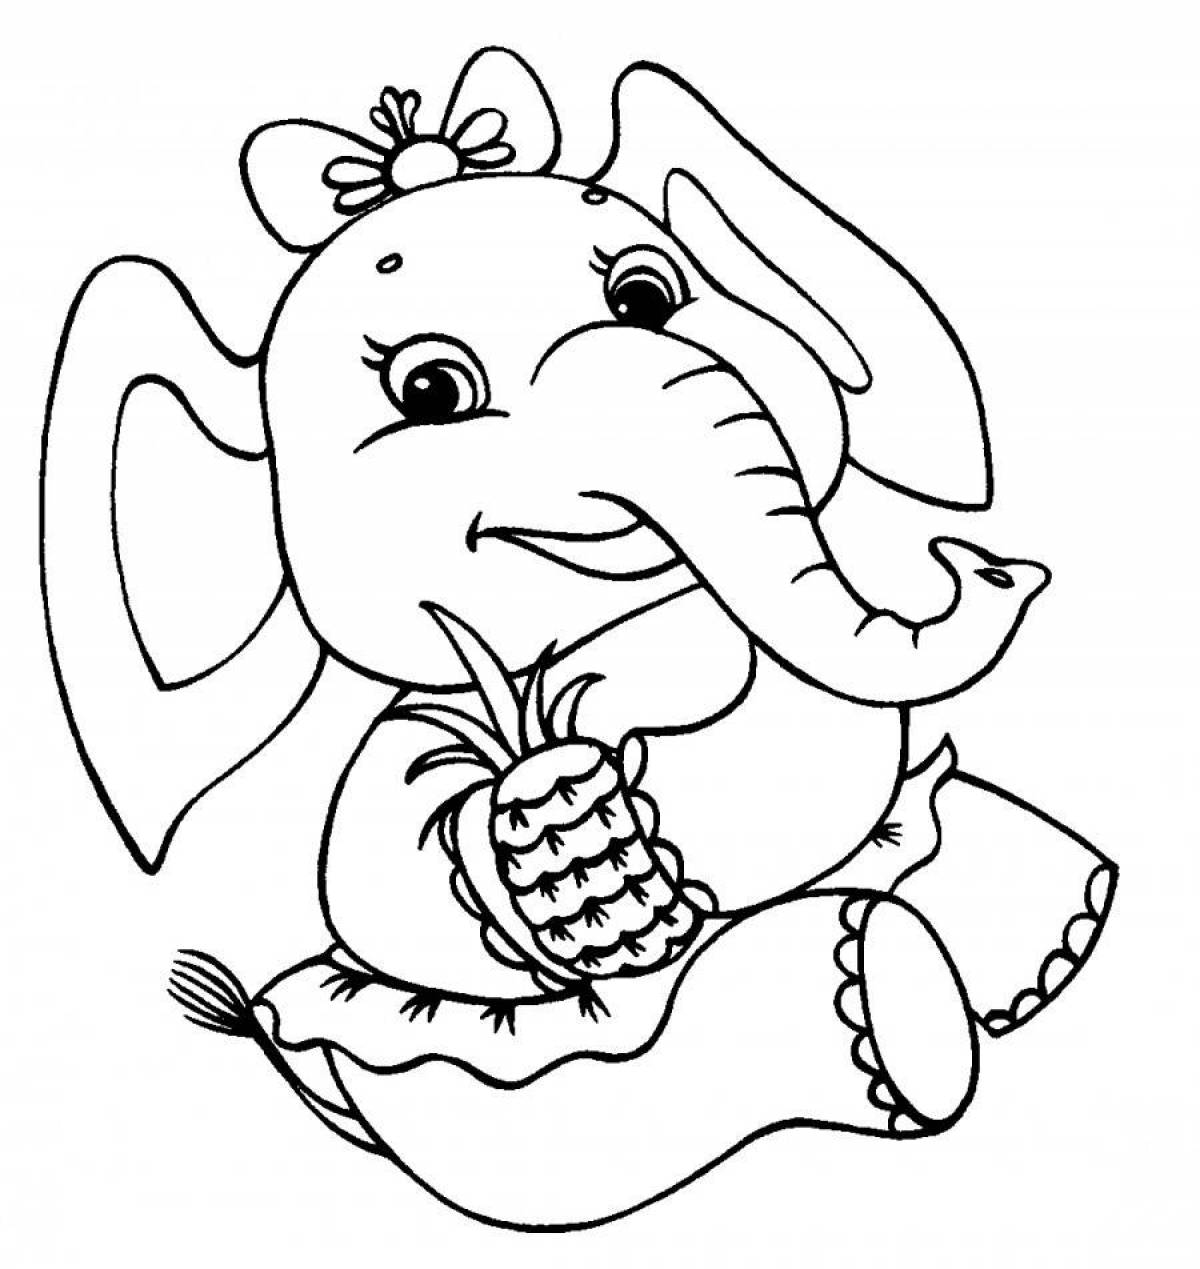 Charming baby elephant coloring book